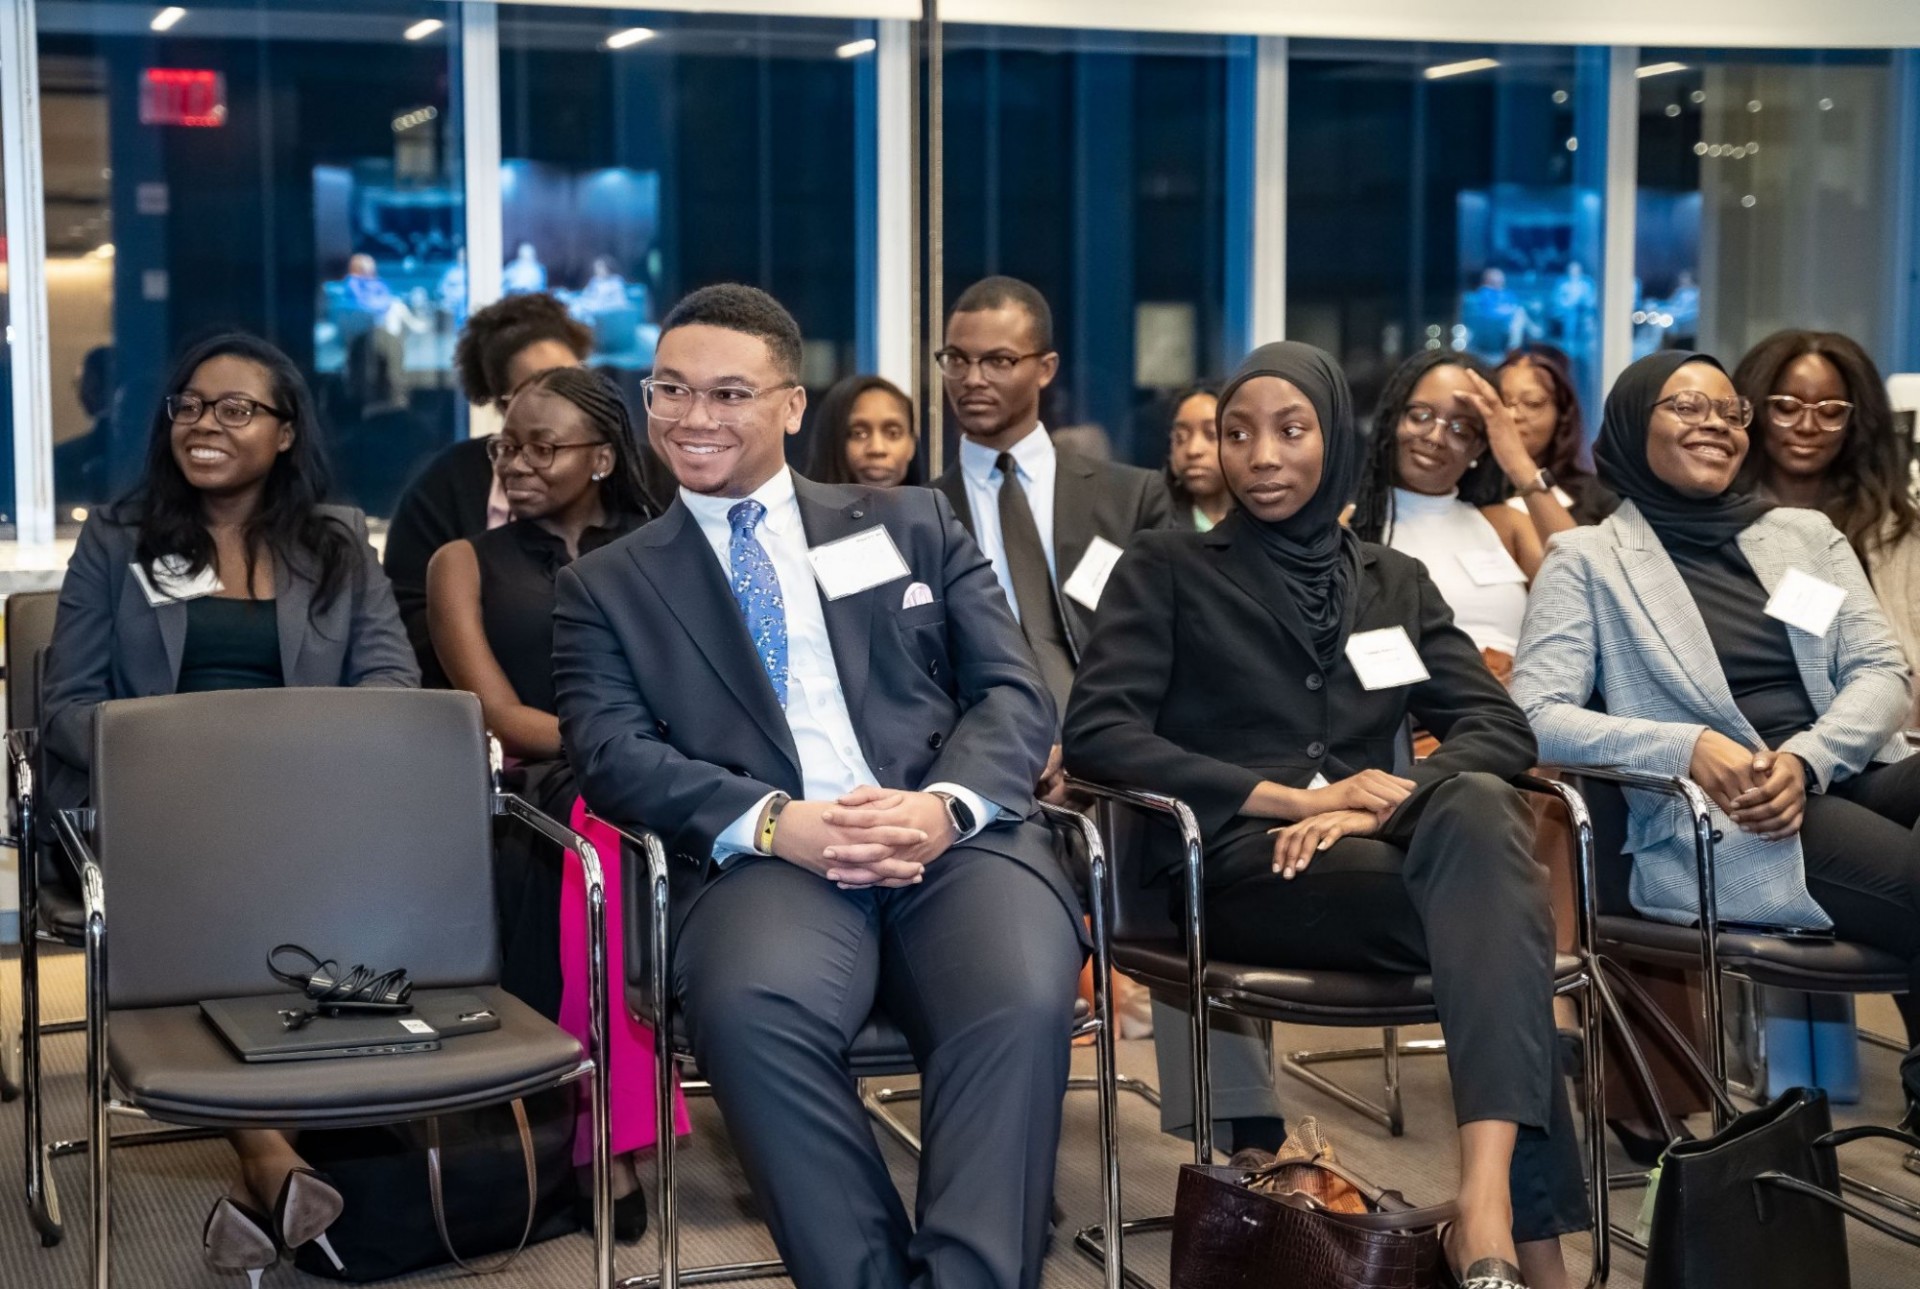 African and Caribbean law students and attorneys sitting in the audience facing a group of speakers at an event